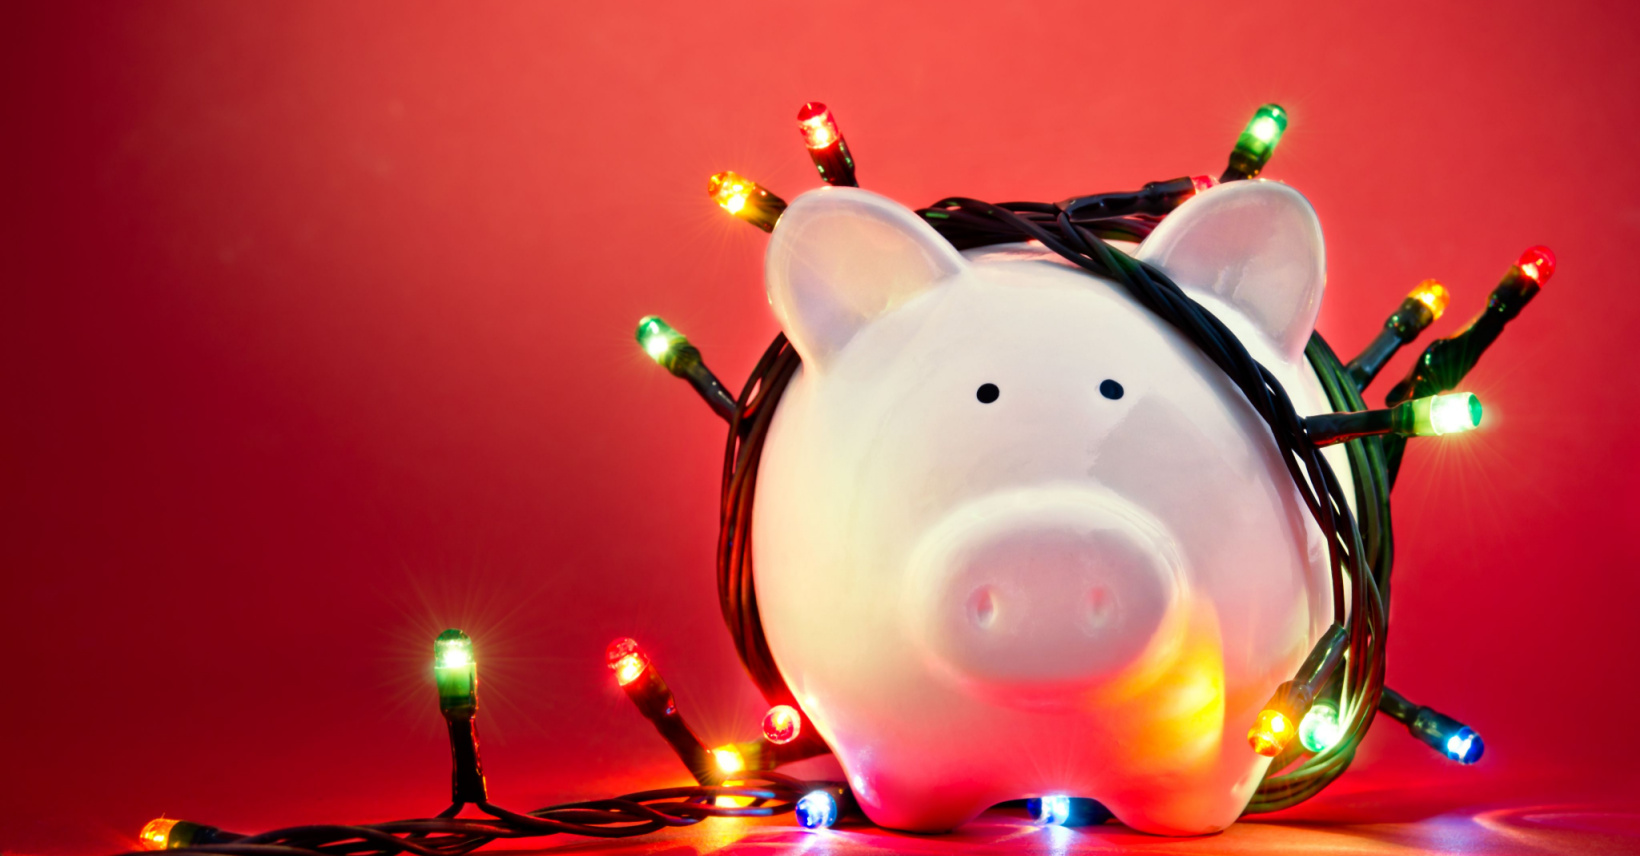 How To Make Some Extra Holiday Spending Money